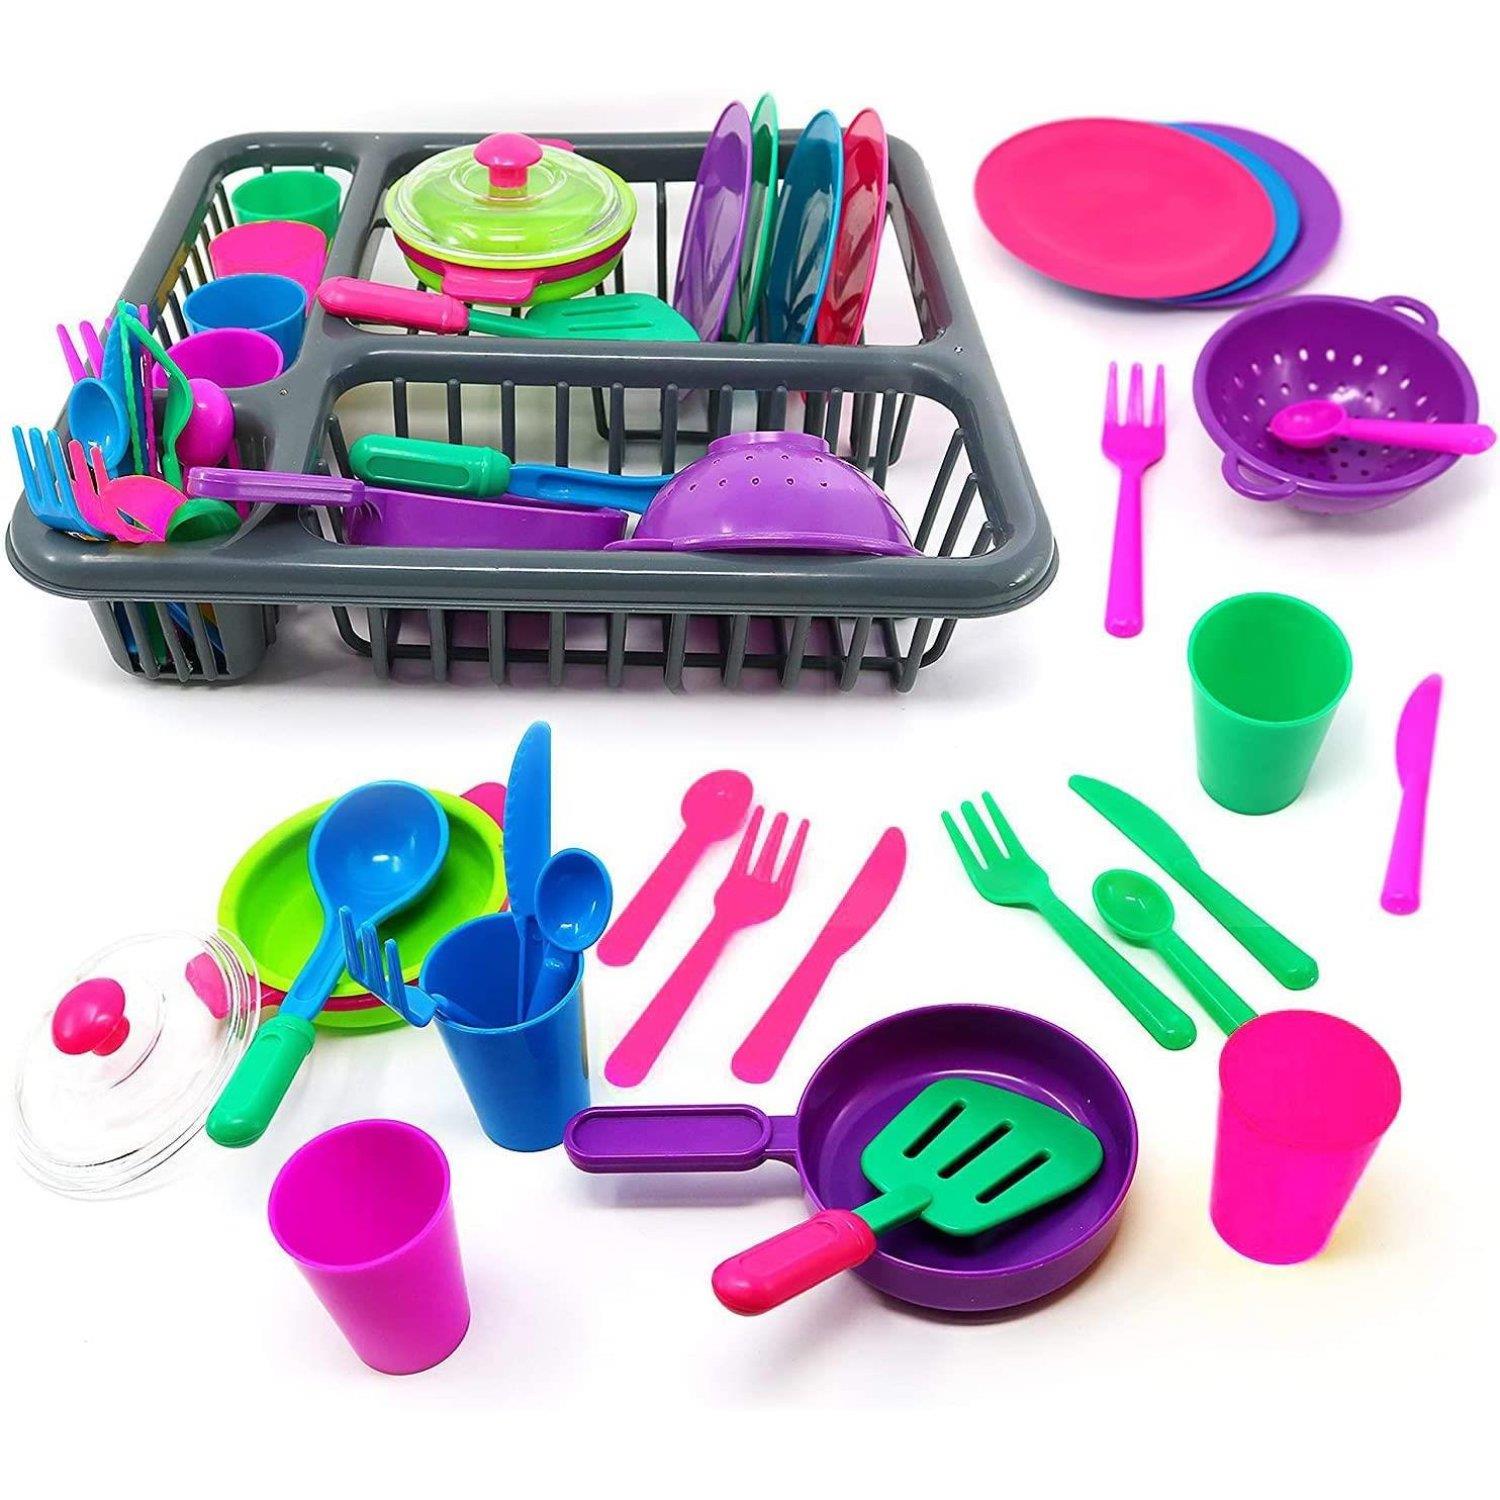 The Magic Toy Shop Toy Play Set Kids Role Play Toy Set Kitchen Accessories Dish Washing Drainer 27 Pieces